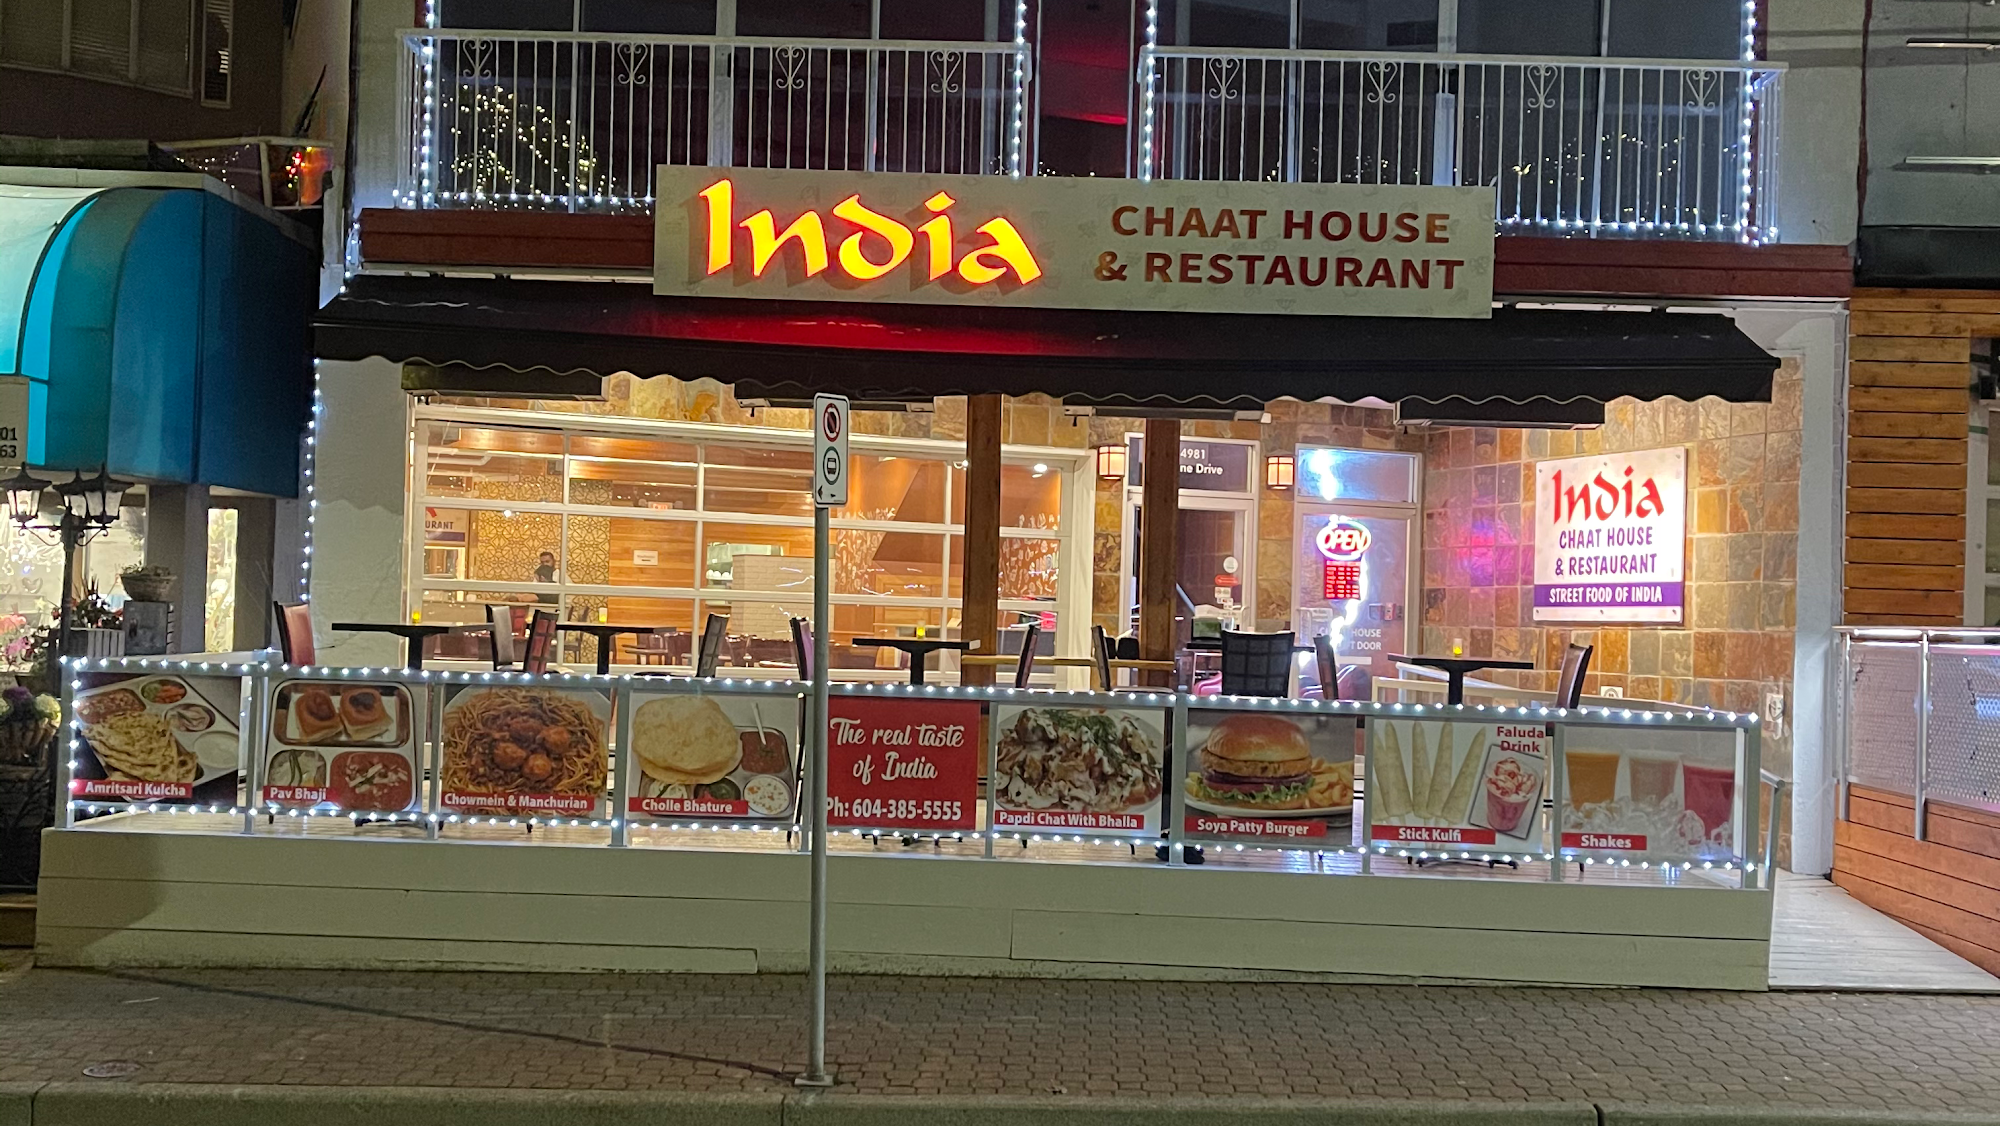 India chaat house and restaurant